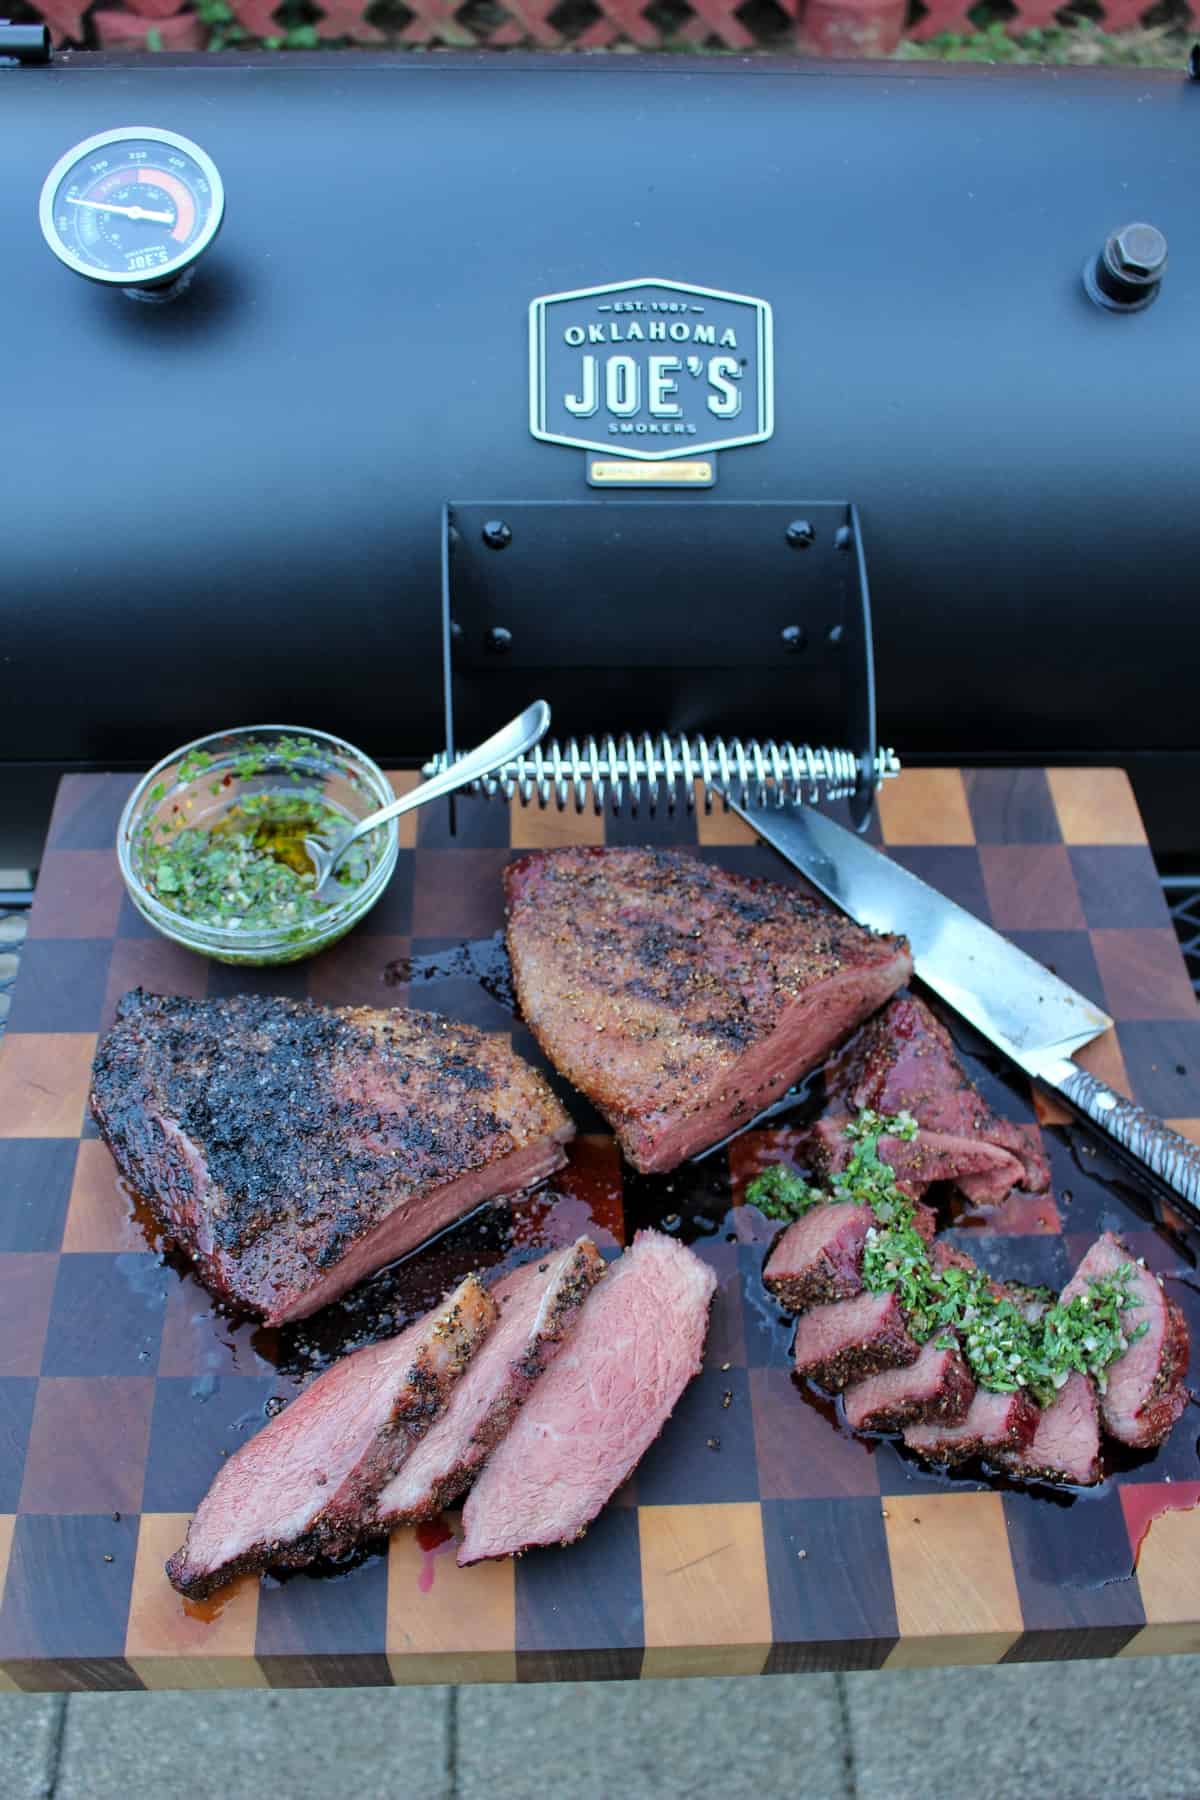 Smoked Picanha with Spicy Smoked Chimichurri drizzled over the top.